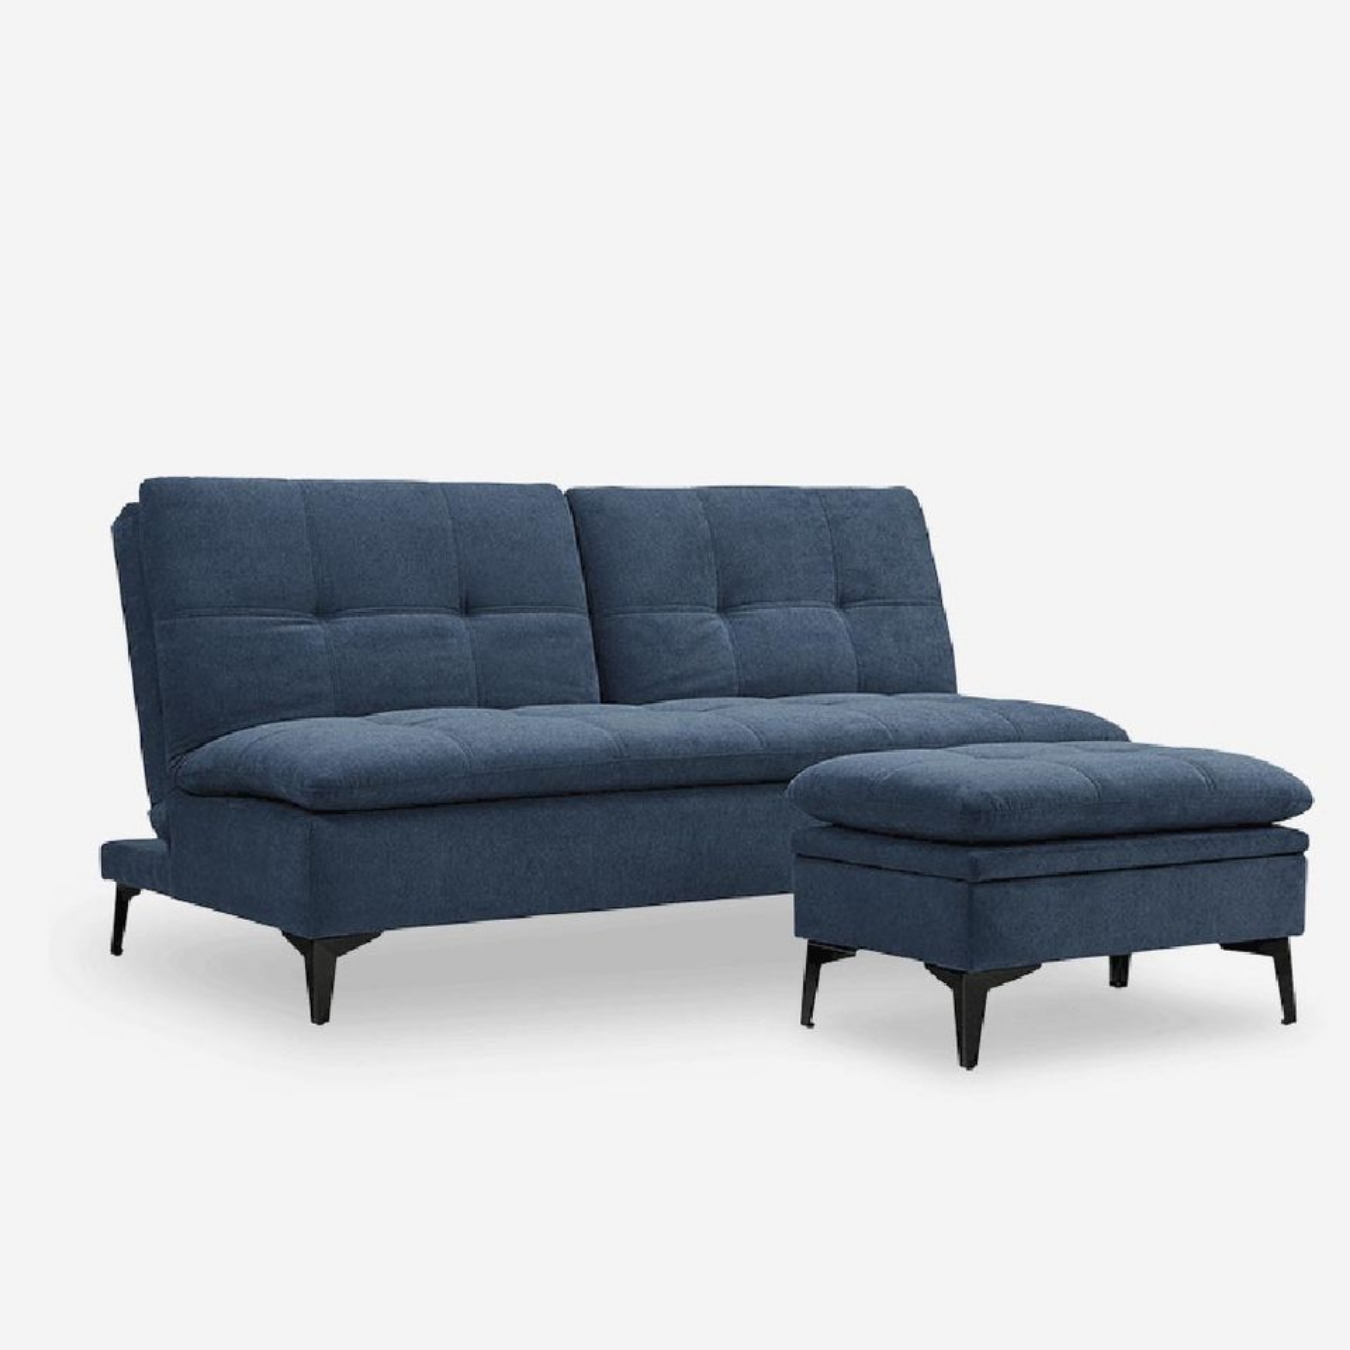 Susan Sofa Bed with Pedal makes a welcome addition to your living space and gives you a soft and comfortable feeling.